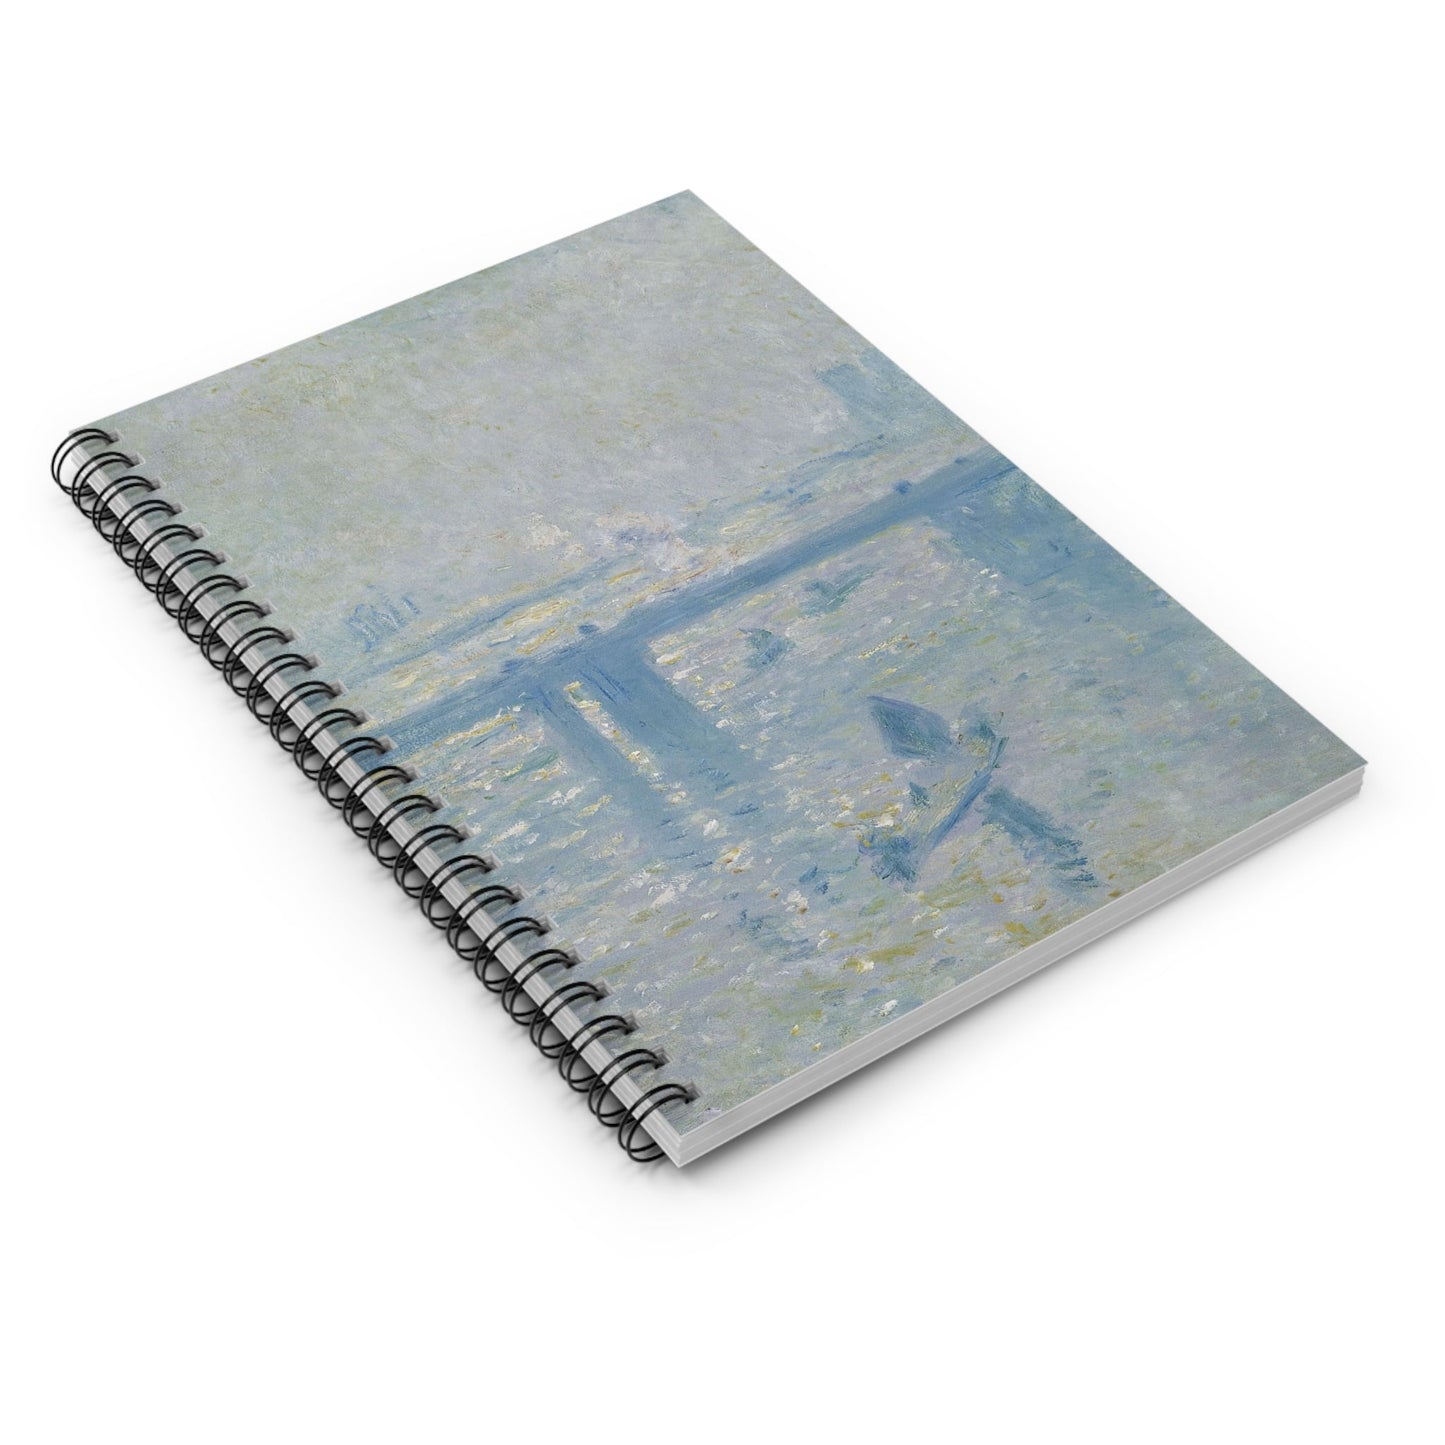 Dusty Light Blue Spiral Notebook Laying Flat on White Surface